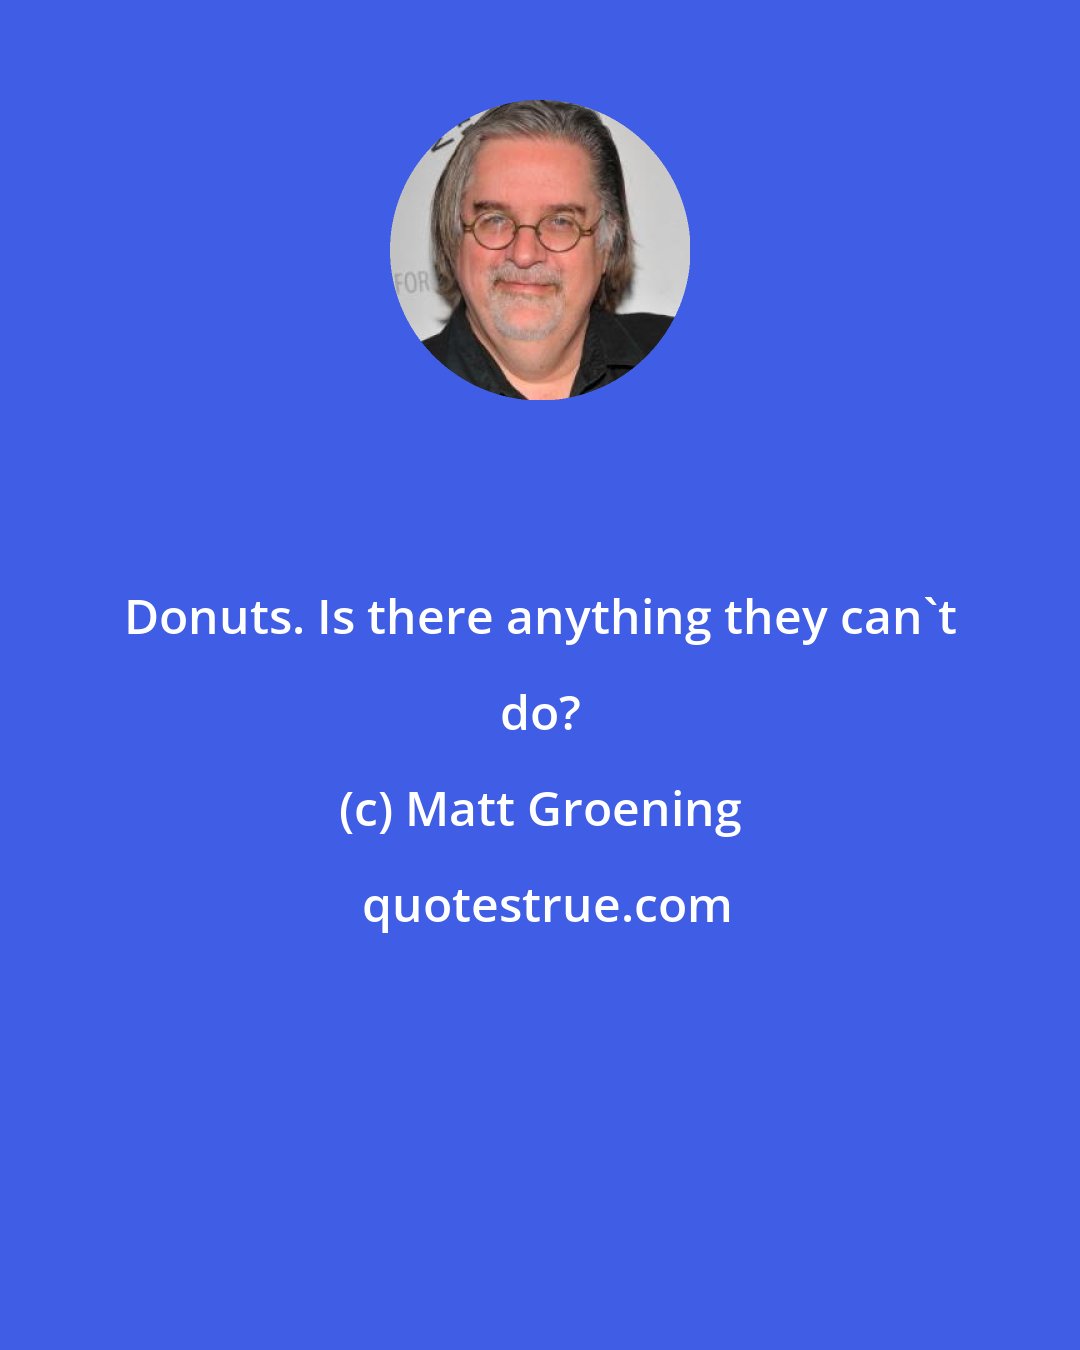 Matt Groening: Donuts. Is there anything they can't do?